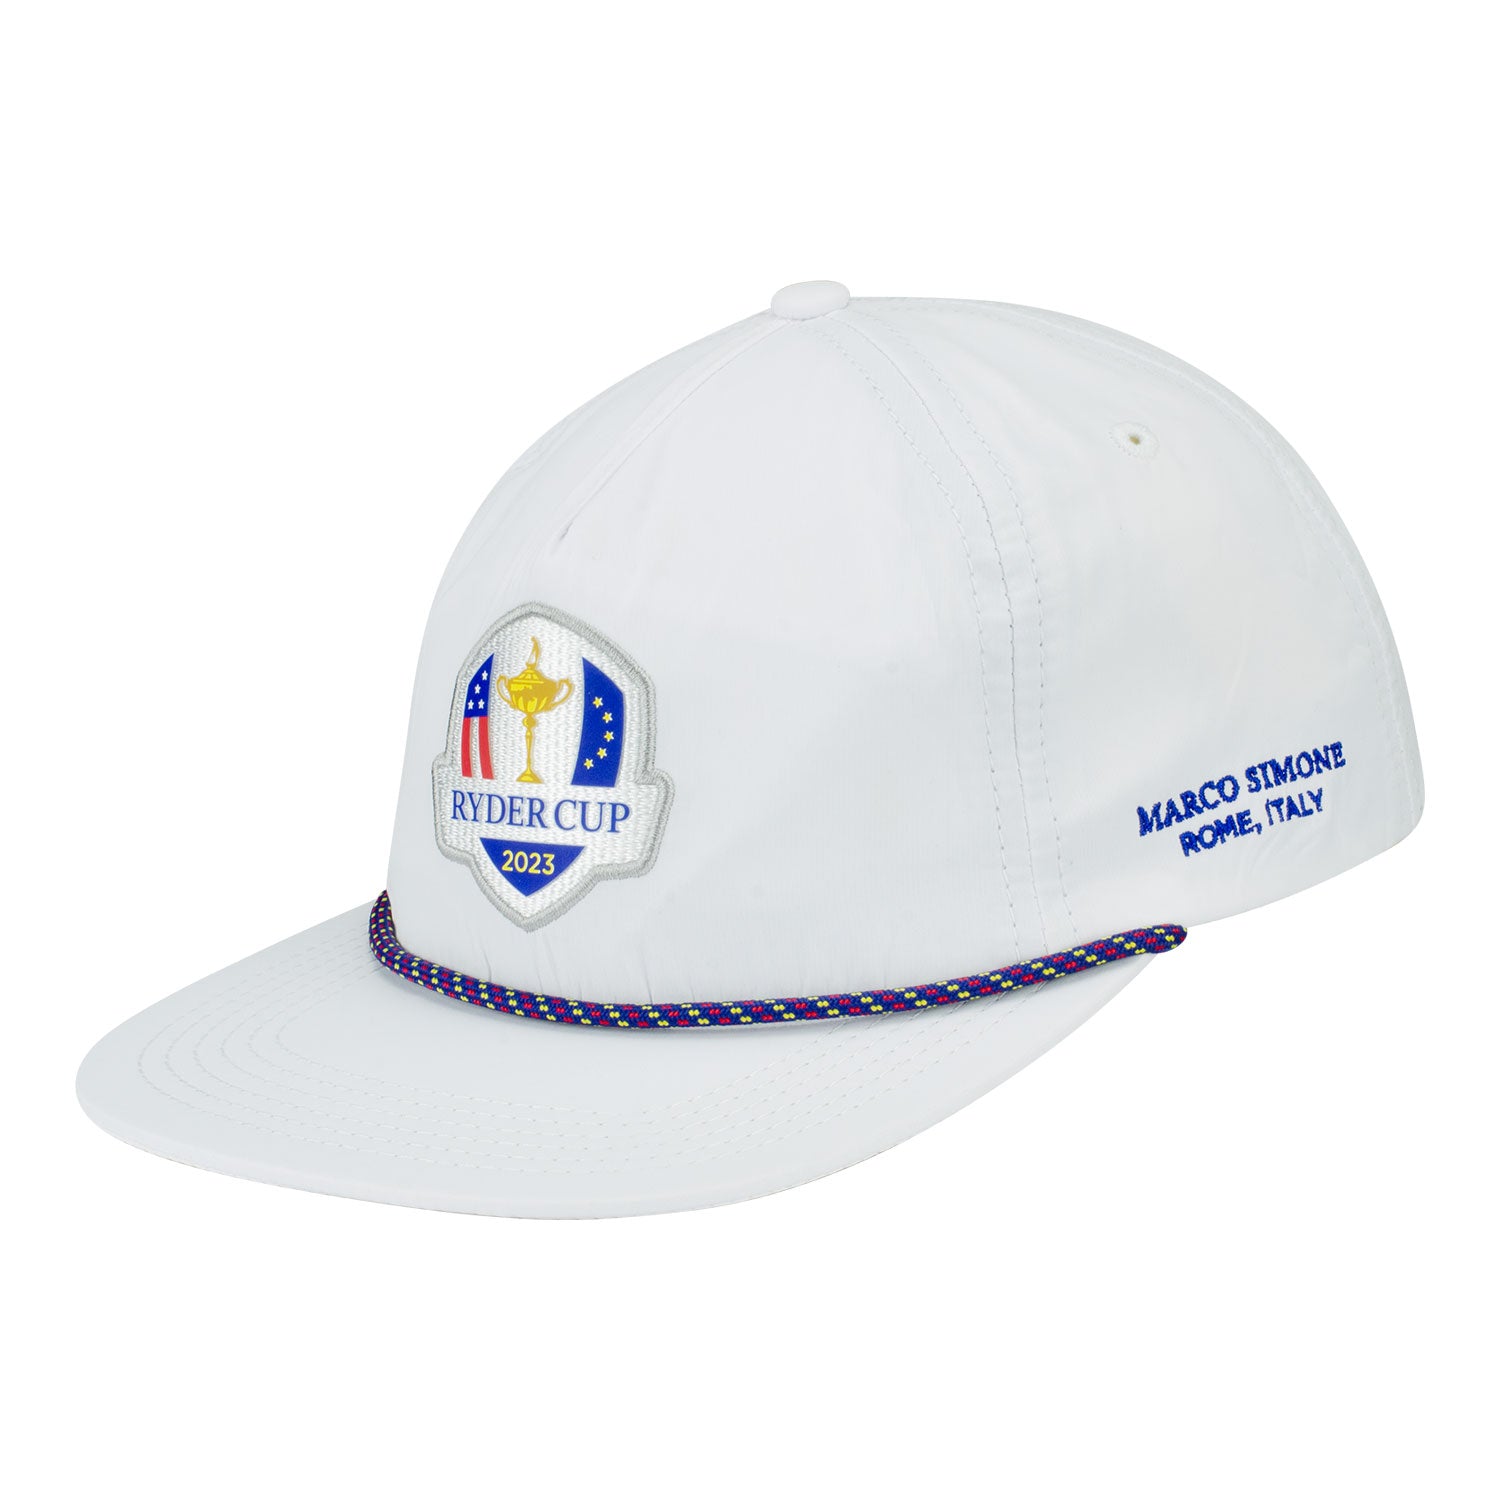 Ryder Cup Hats - US Ryder Cup